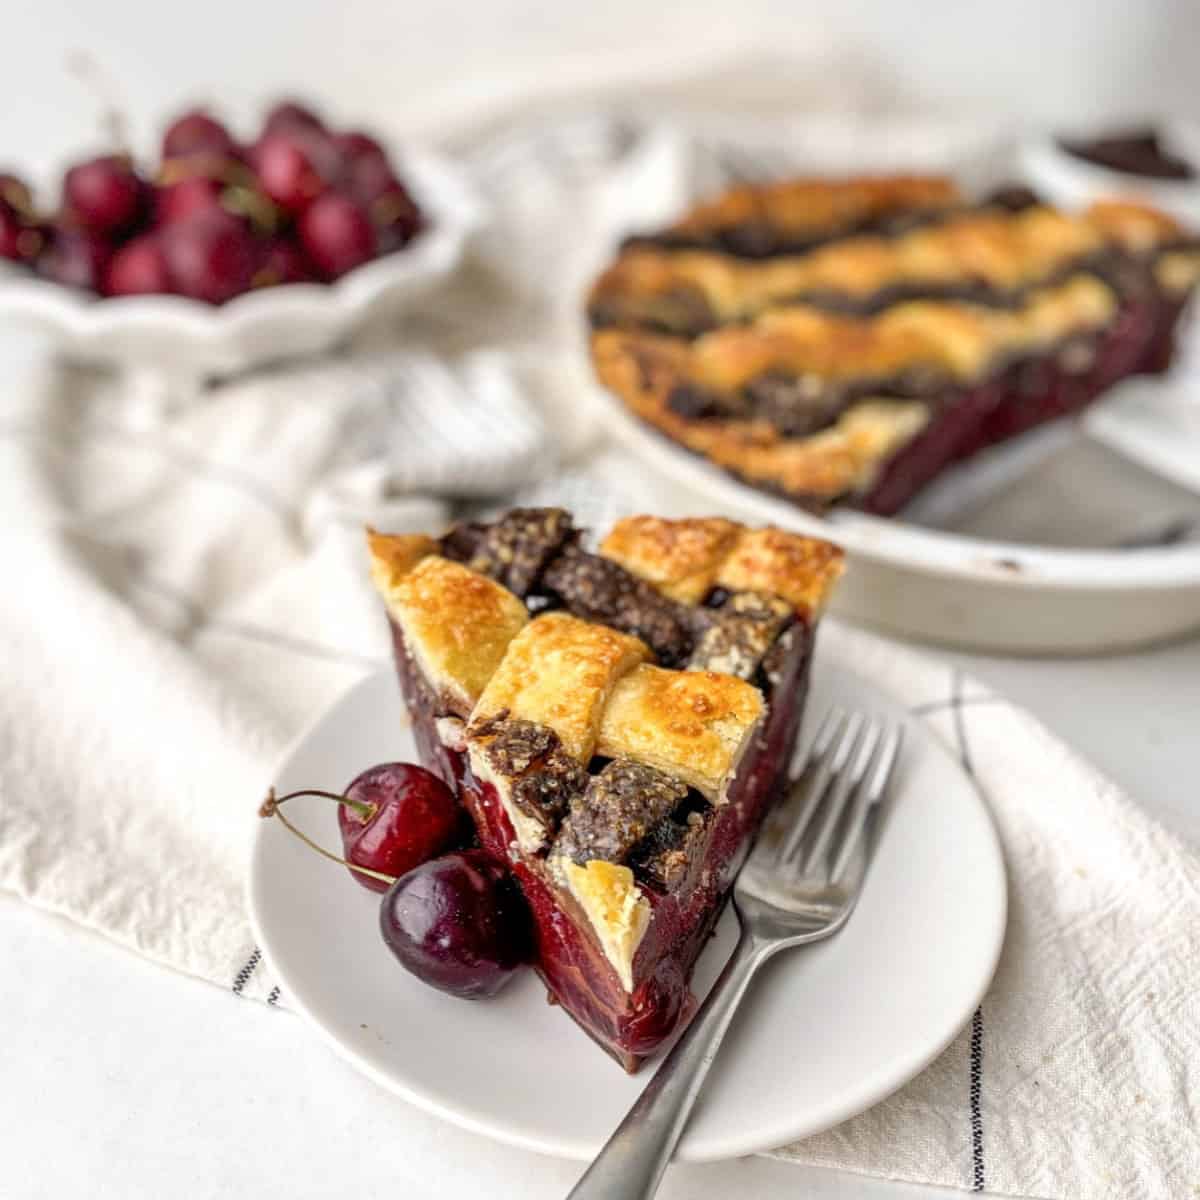 Slice of Chocolate Cherry Pie on a white plate with a bowl of cherries in the background.